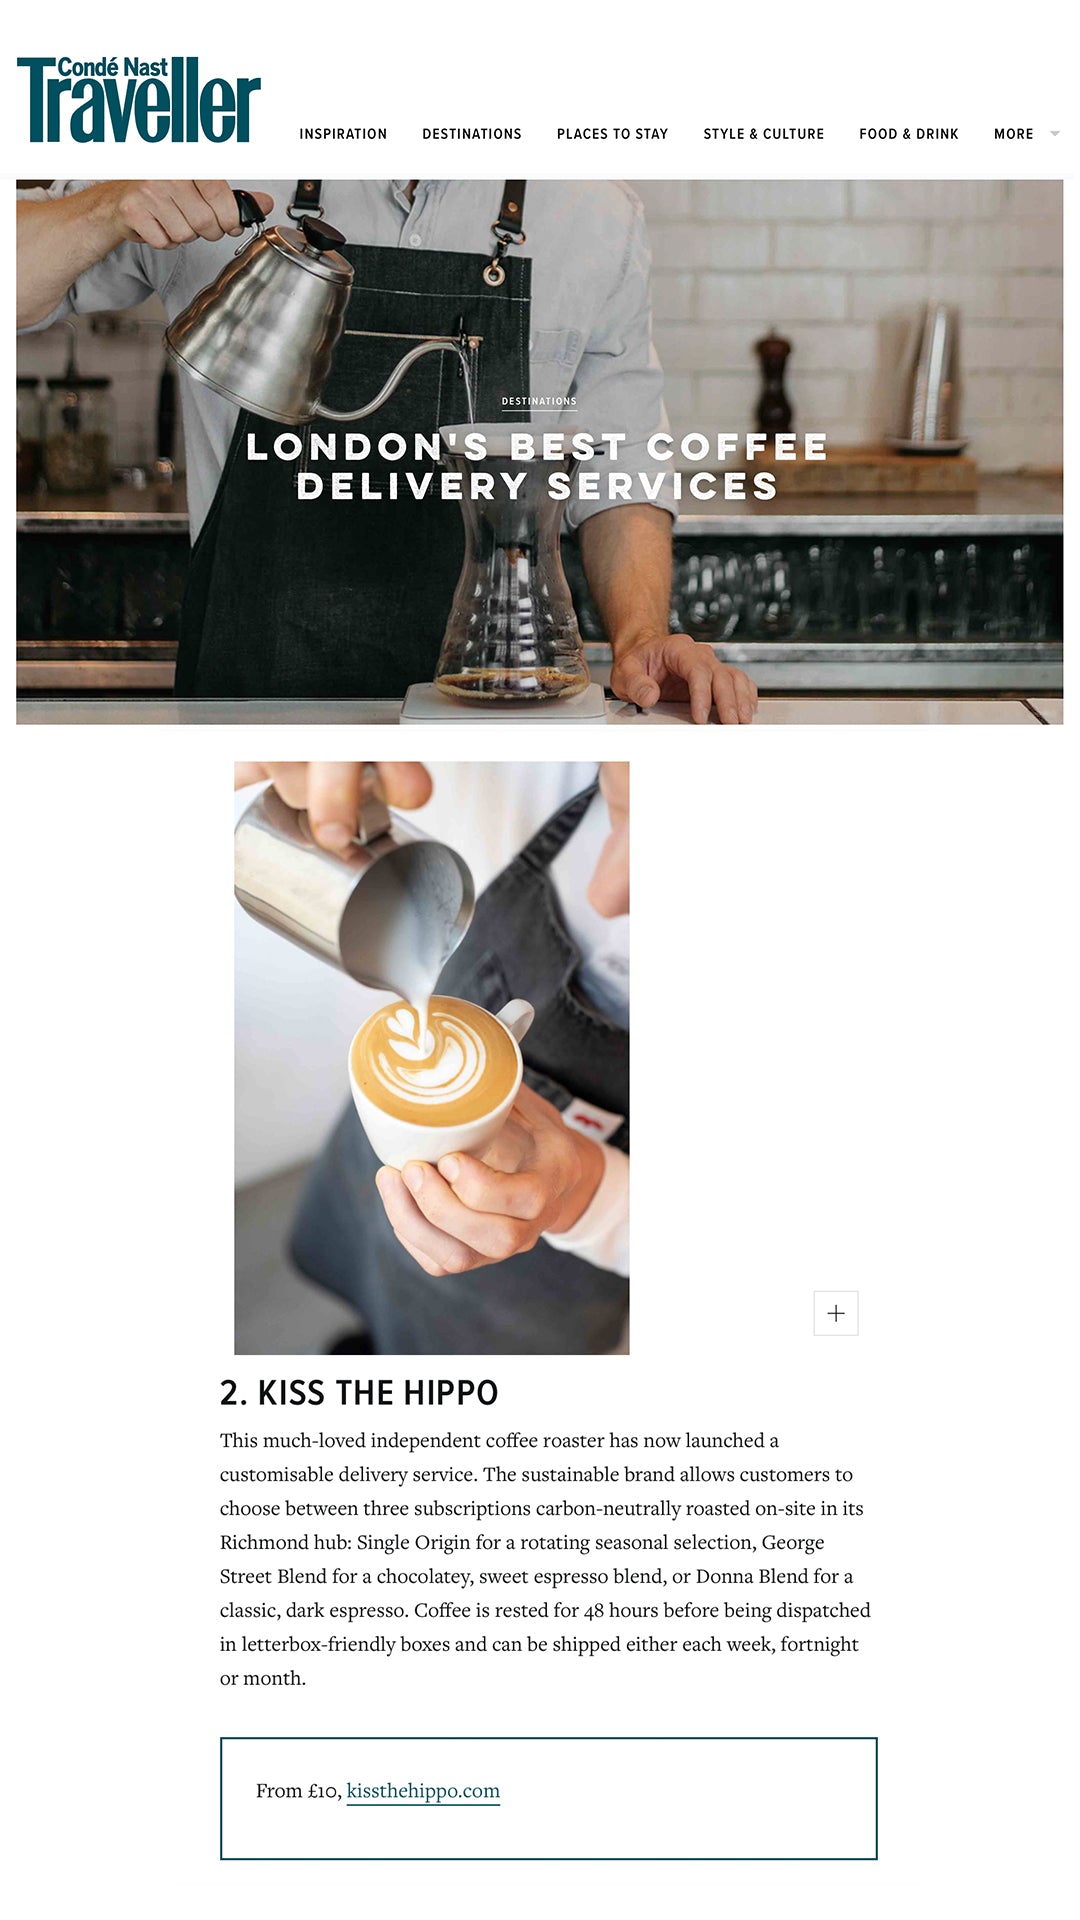 kiss the hippo - coffee - press images